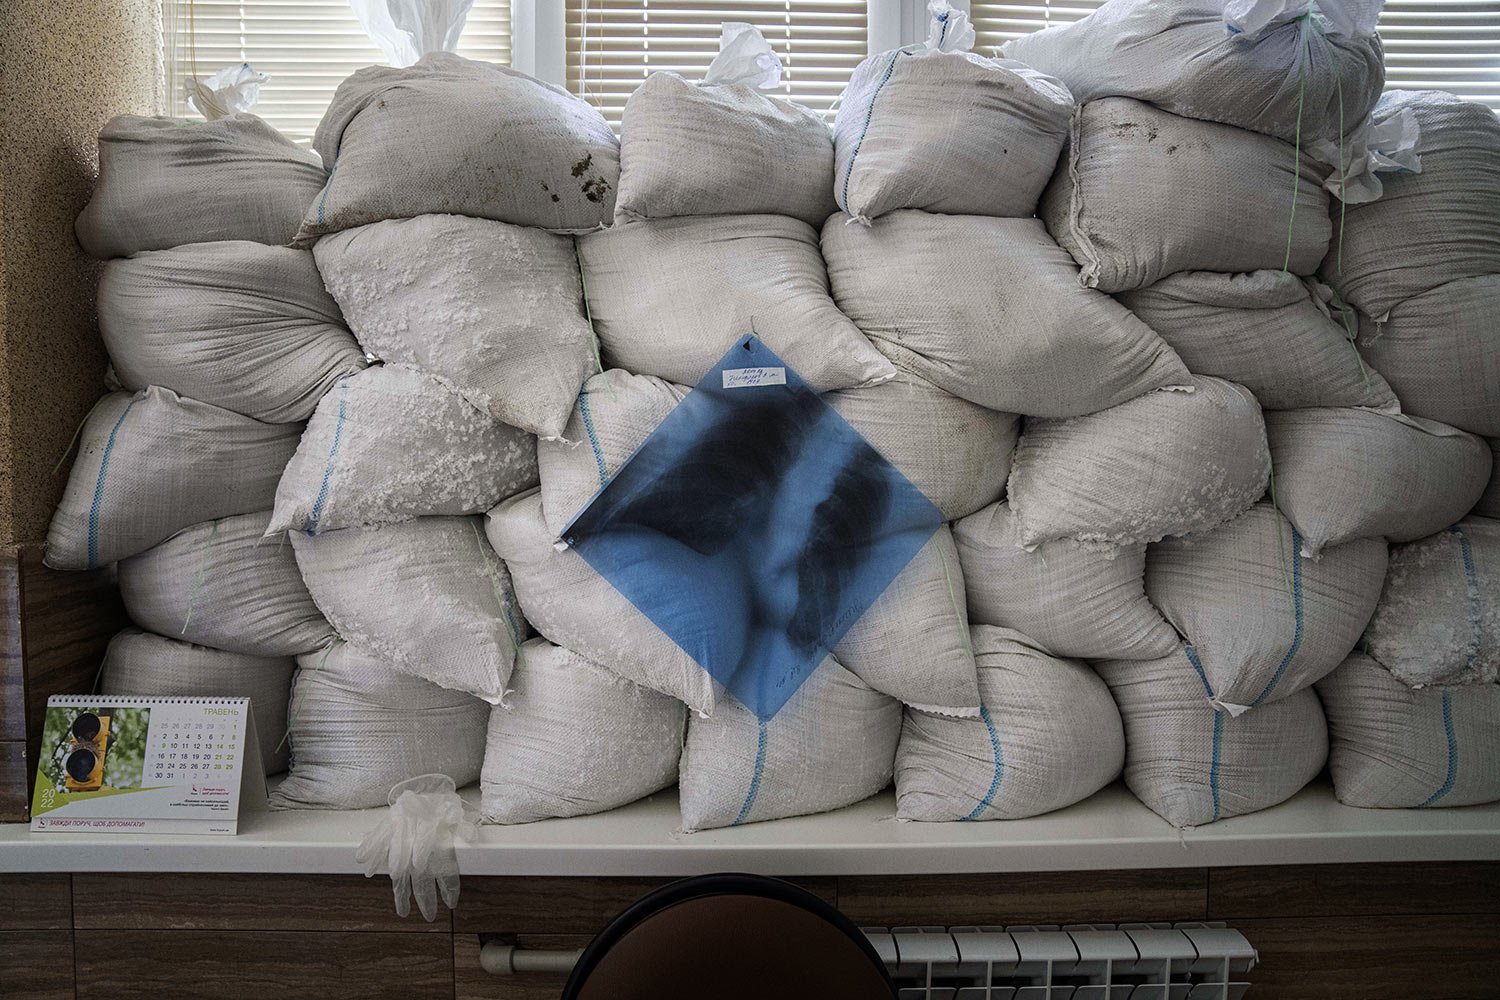  An X-Ray film of lungs hangs on sandbags at a hospital in Kramatorsk in eastern Ukraine, Tuesday, April 26, 2022. (AP Photo/Evgeniy Maloletka) 